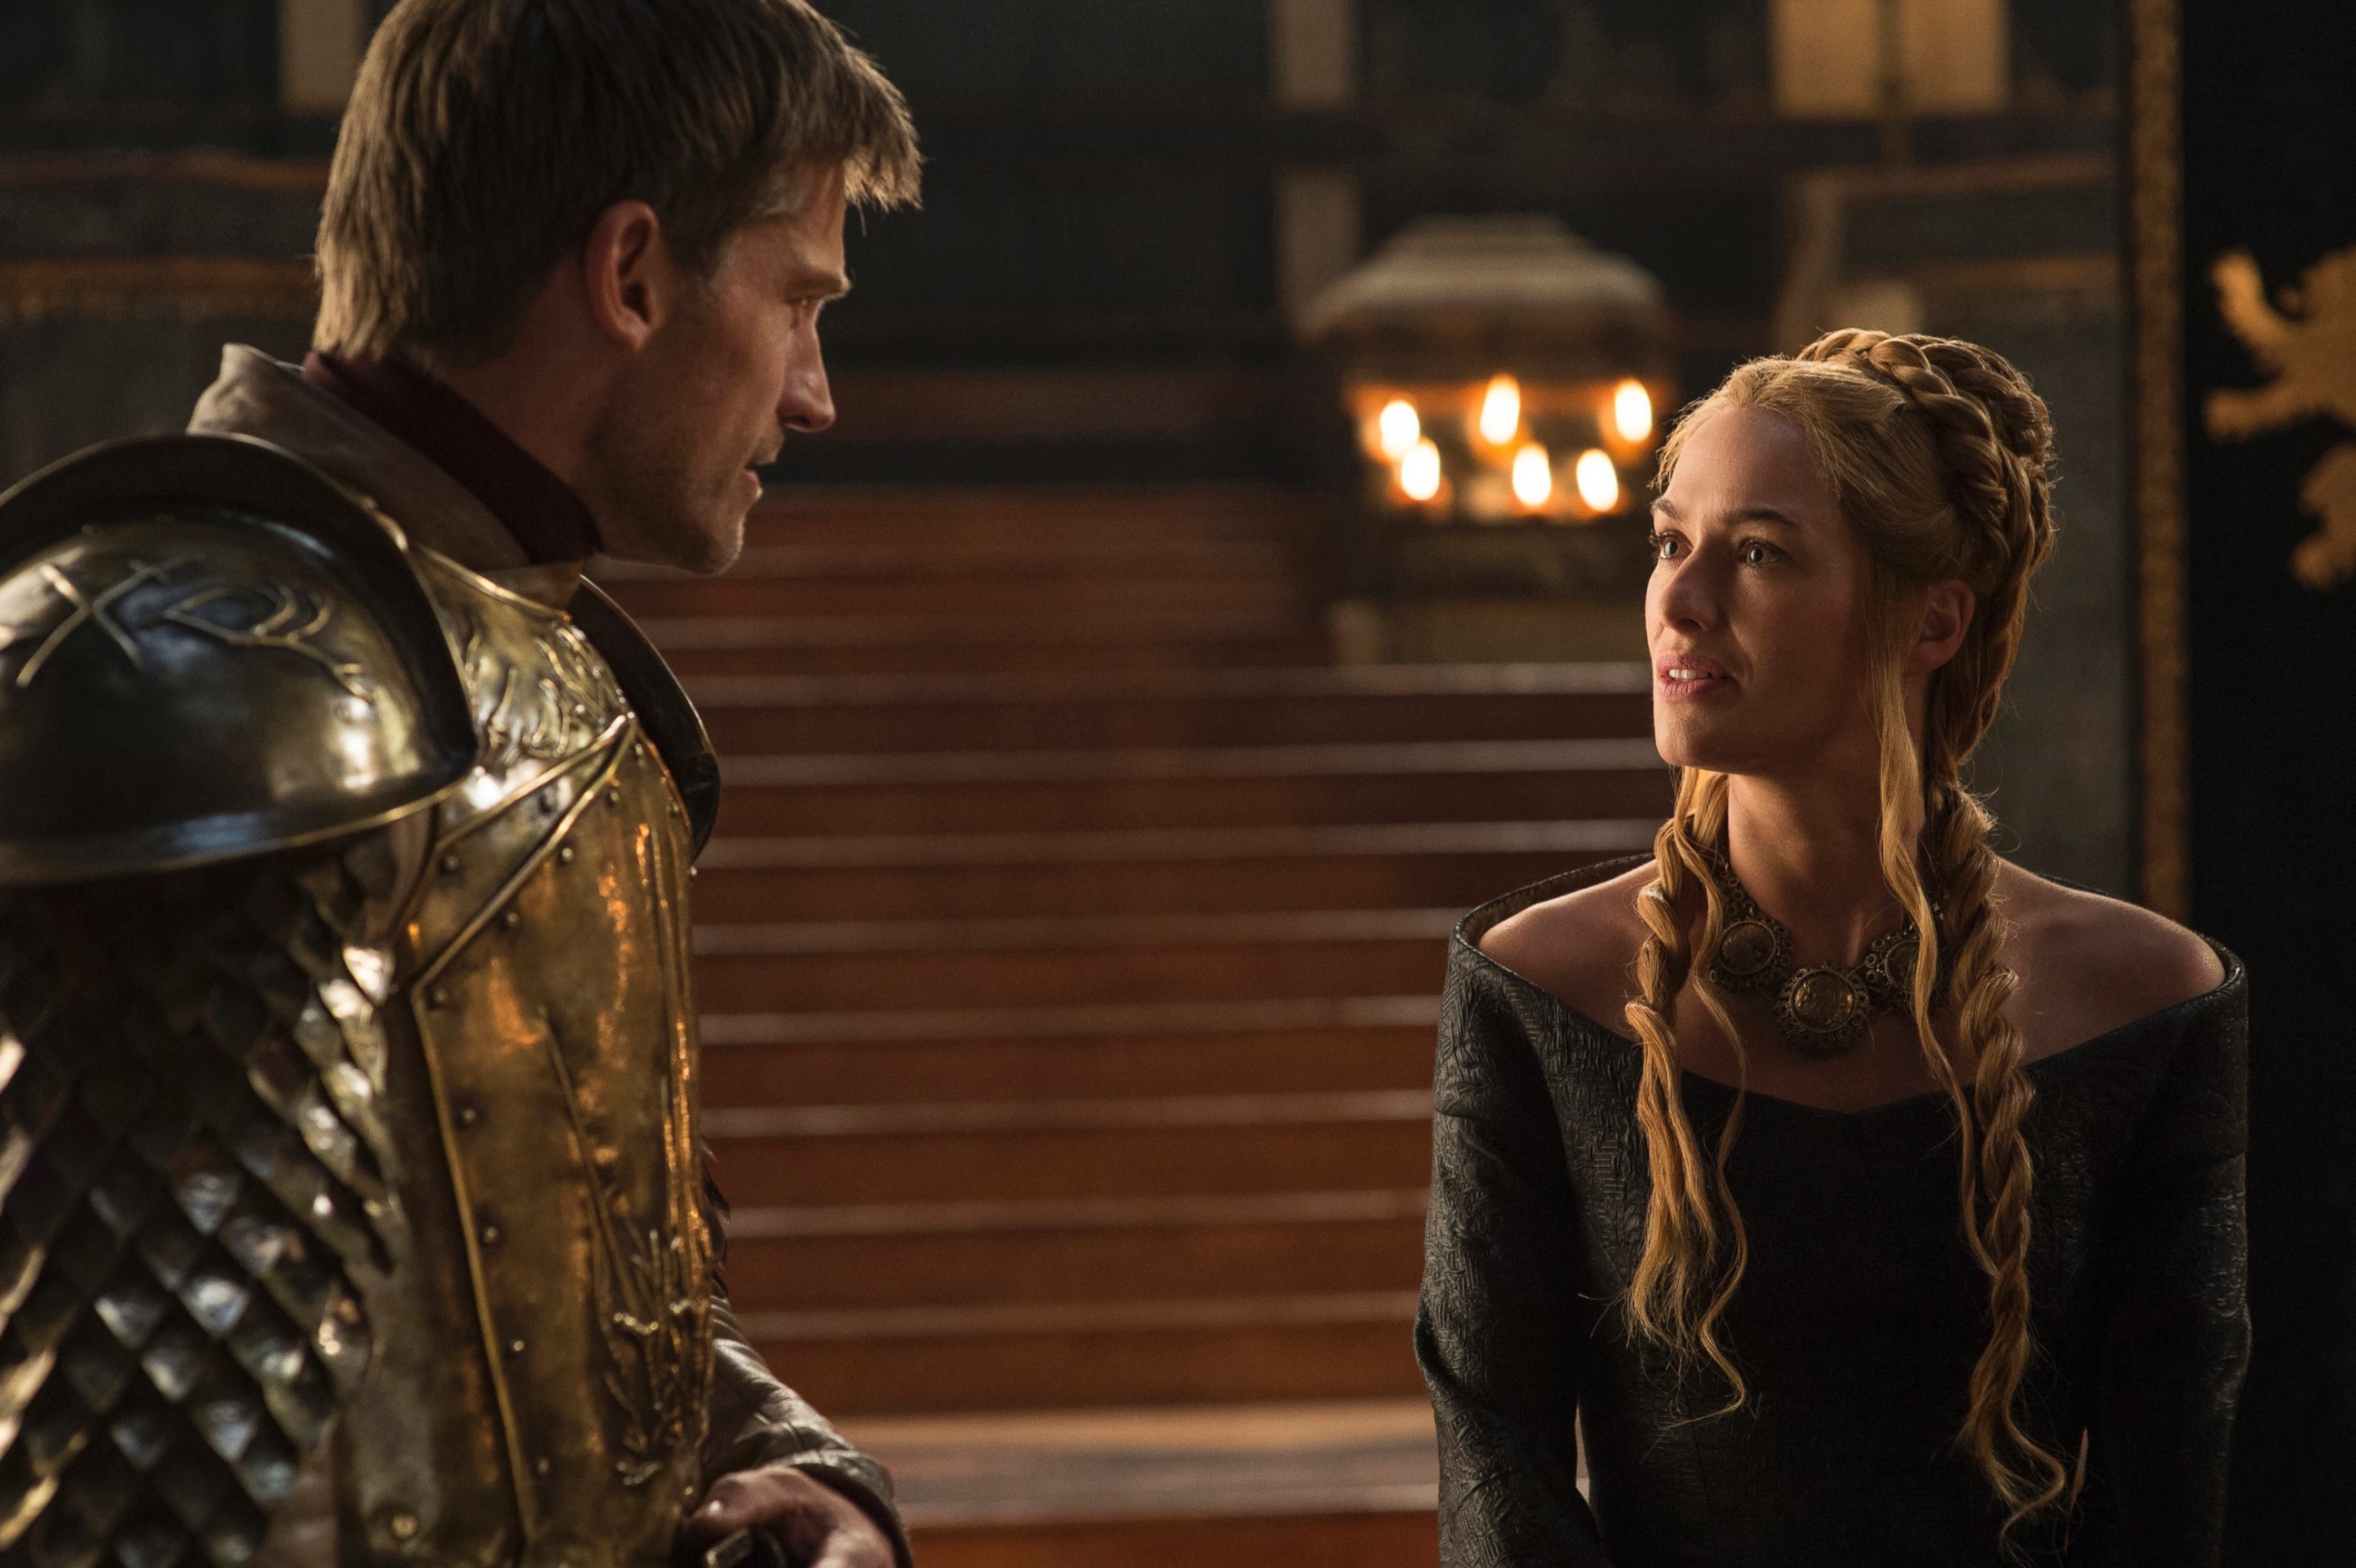 PHOTO: Nikolaj Coster-Waldau as Jaime Lannister, left, and Lena Headey as Cersei Lannister in a scene from season five of "Game of Thrones."